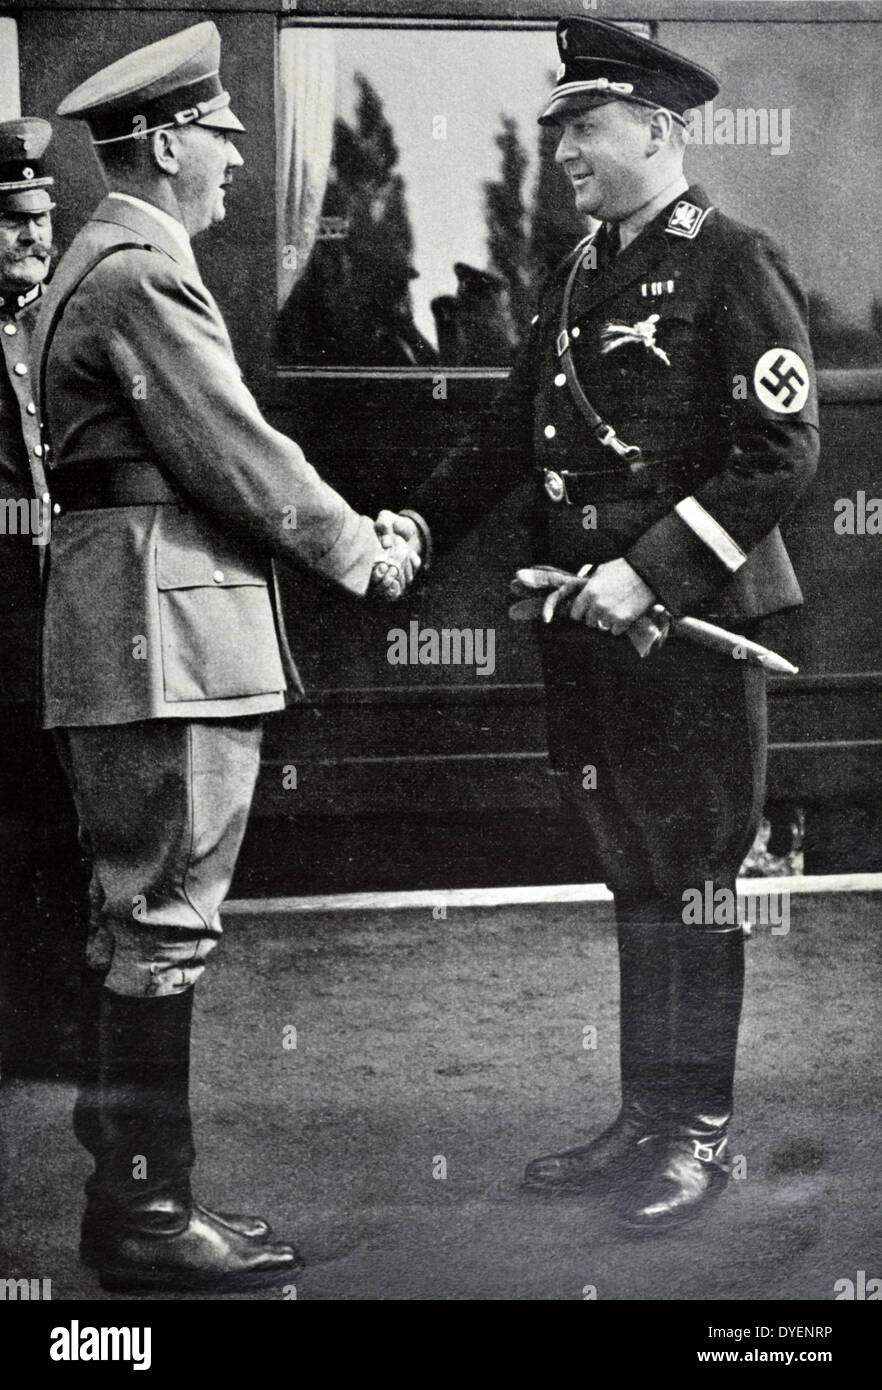 Adolf Hitler is met by Richard Walther Darré (1895 – 1953) an SS-Obergruppenführer and one of the leading Nazi 'blood and soil' (German: Blut und Boden) ideologists. He served as Reich Minister of Food and Agriculture from 1933 to 1942. Stock Photo